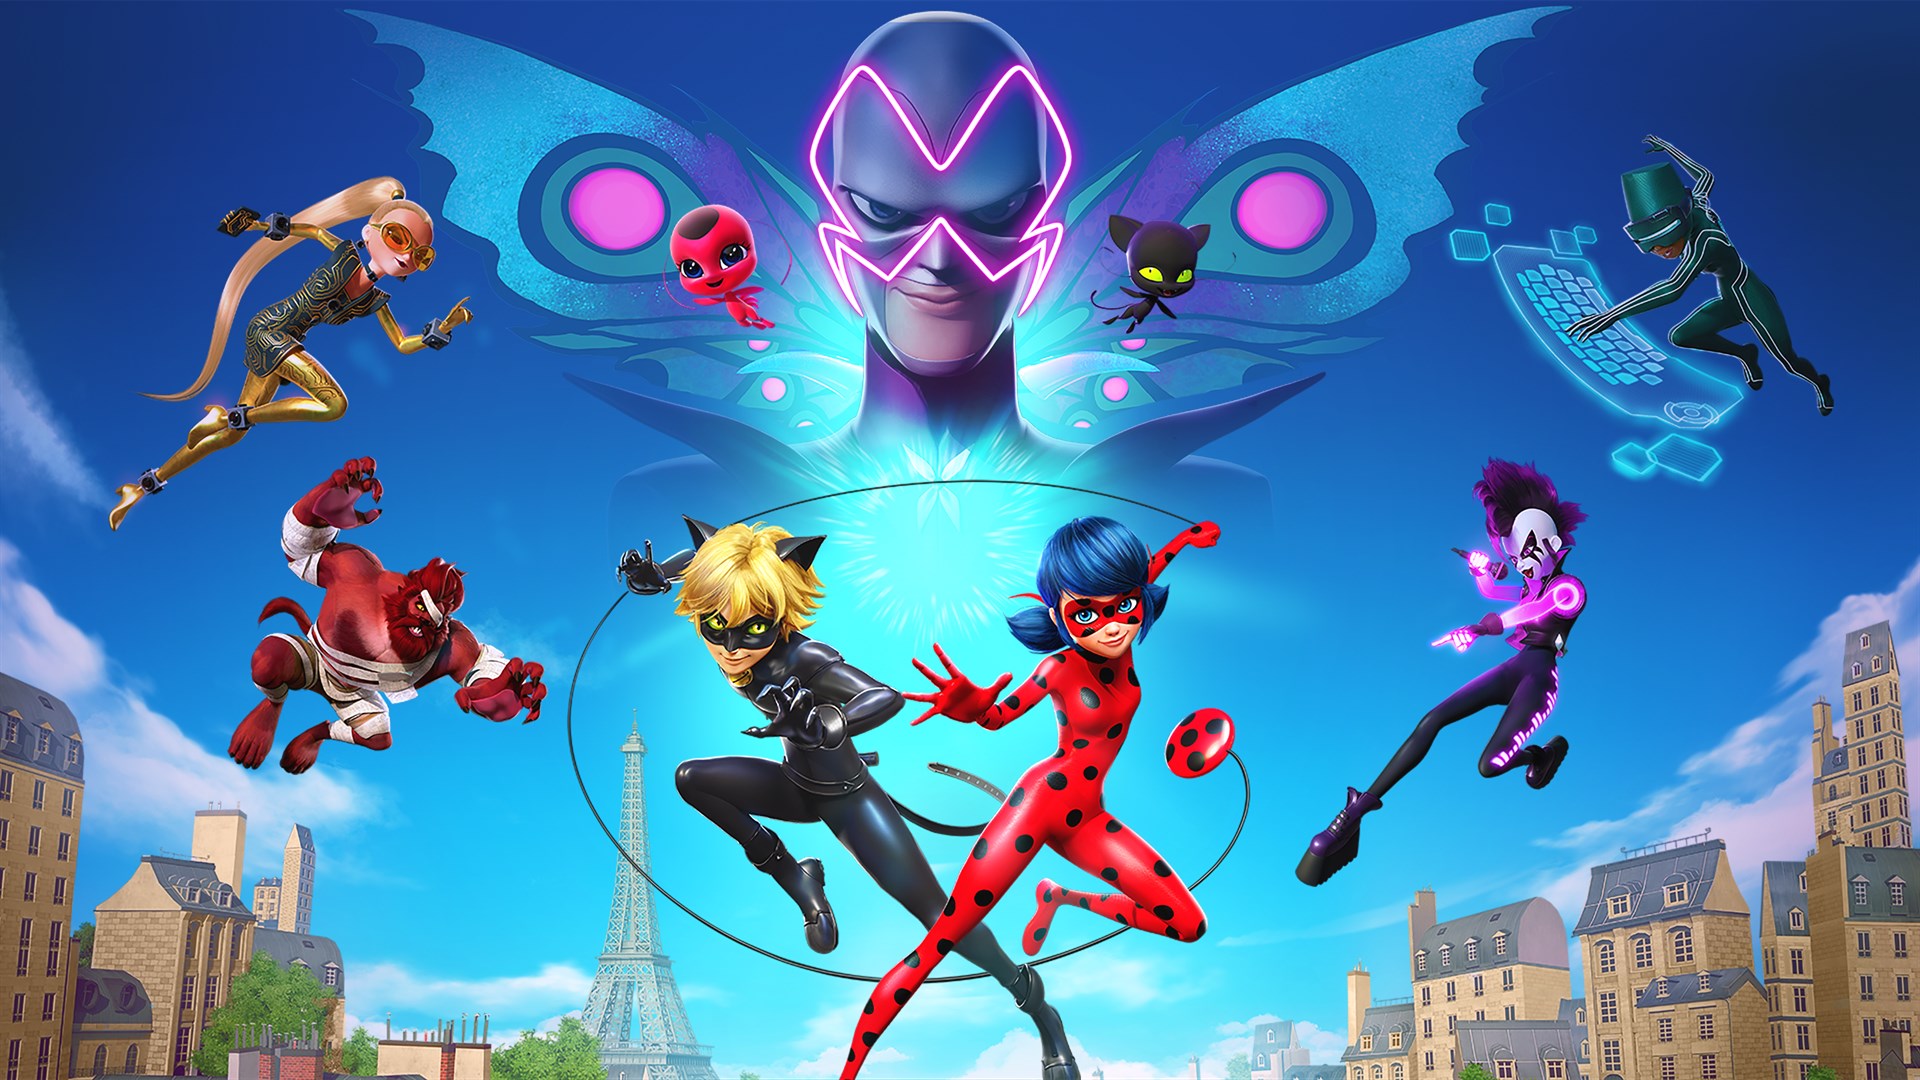 miraculous-rise-of-the-sphinx-kaufen-microsoft-store-de-ch